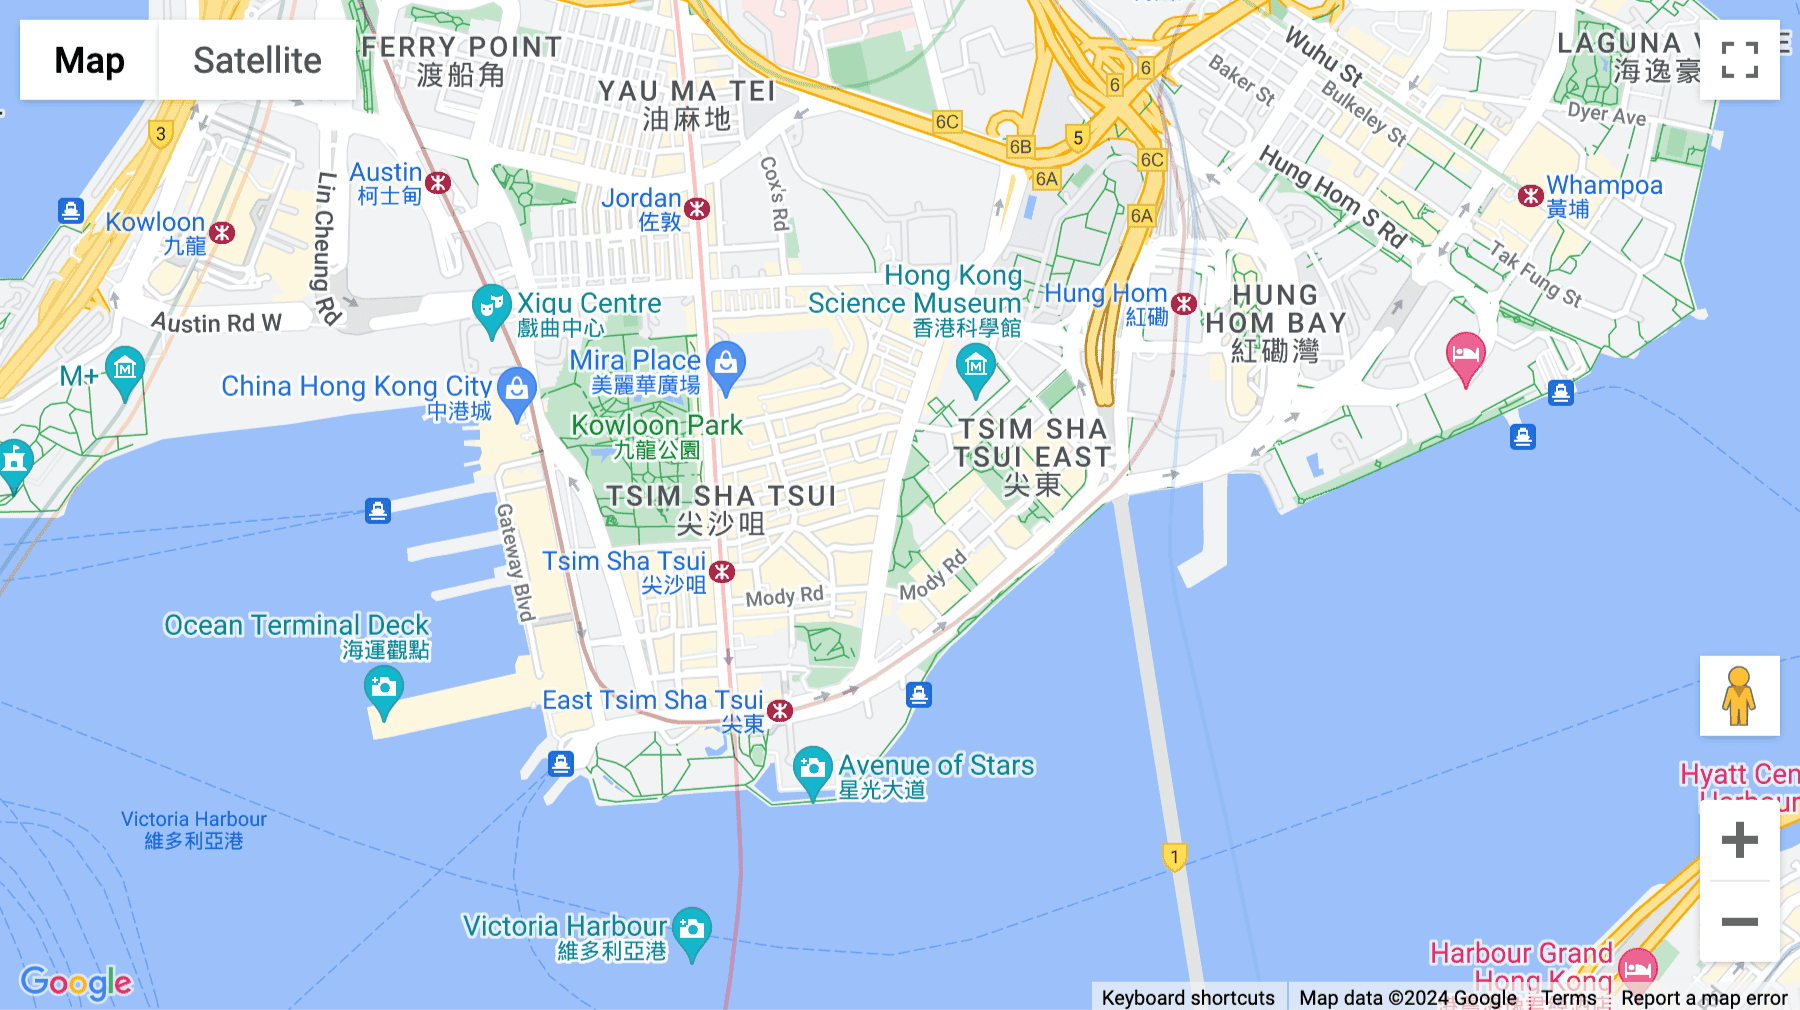 Click for interative map of Chevalier House, Unit 308, 3rd Floor, 45-51 Chatham Road South, Hong Kong